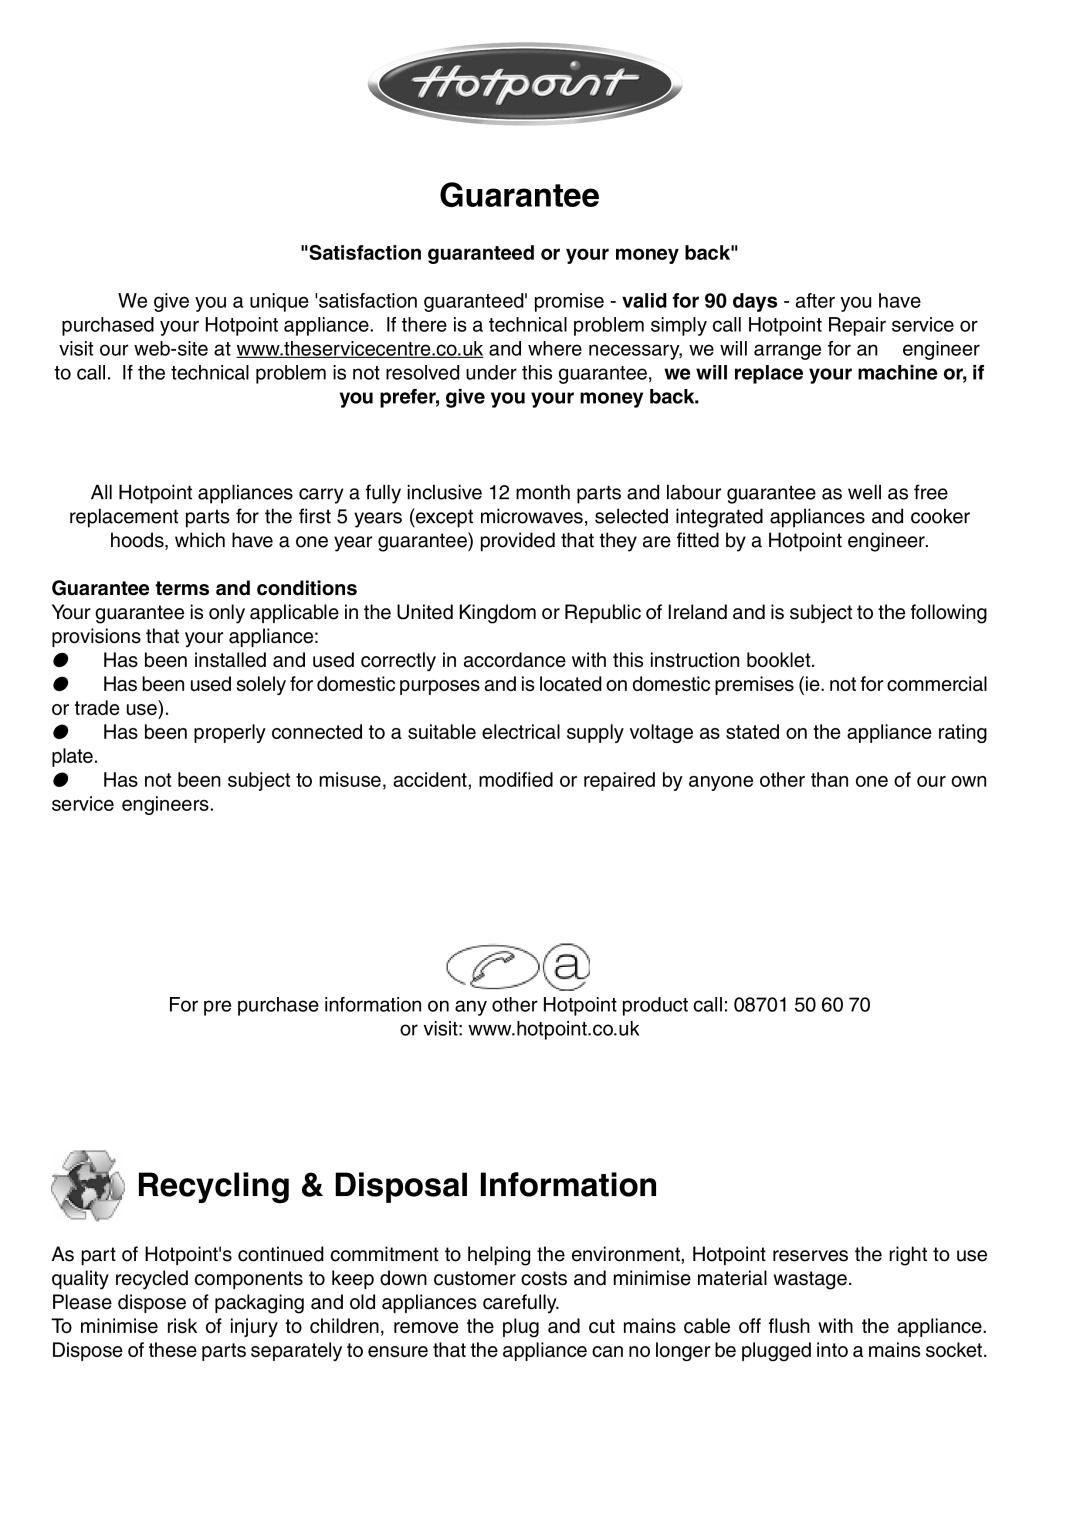 Hotpoint E6004 manual Guarantee, Recycling & Disposal Information, Satisfaction guaranteed or your money back 